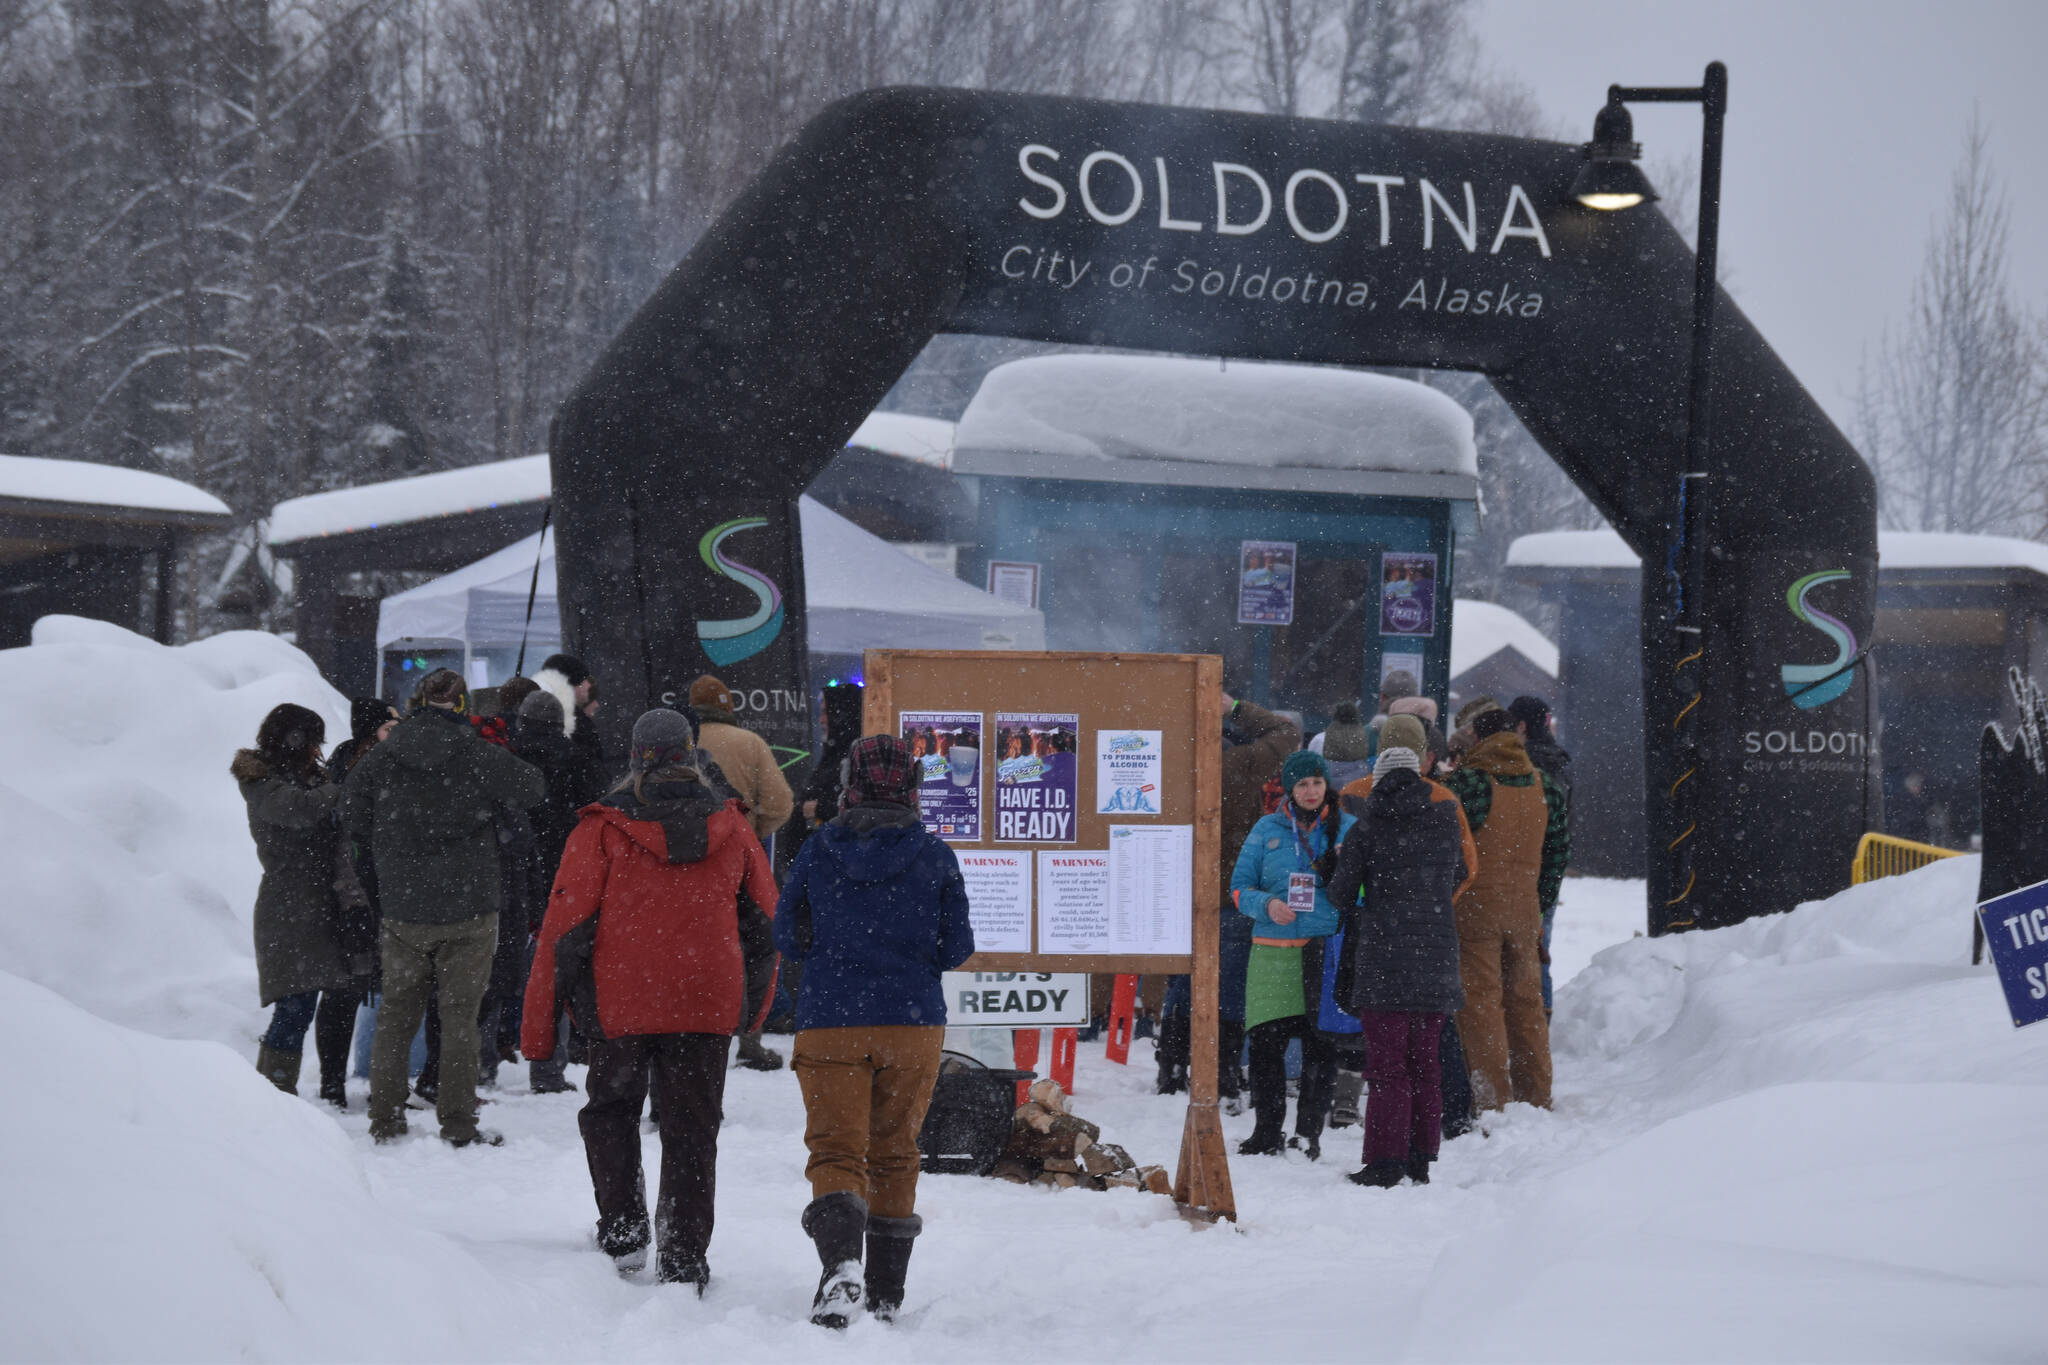 Attendees line up ahead of the start of Frozen RiverFest on Saturday, Feb. 18, 2023 at Soldotna Creek Park in Soldotna, Alaska. (Jake Dye/Peninsula Clarion)